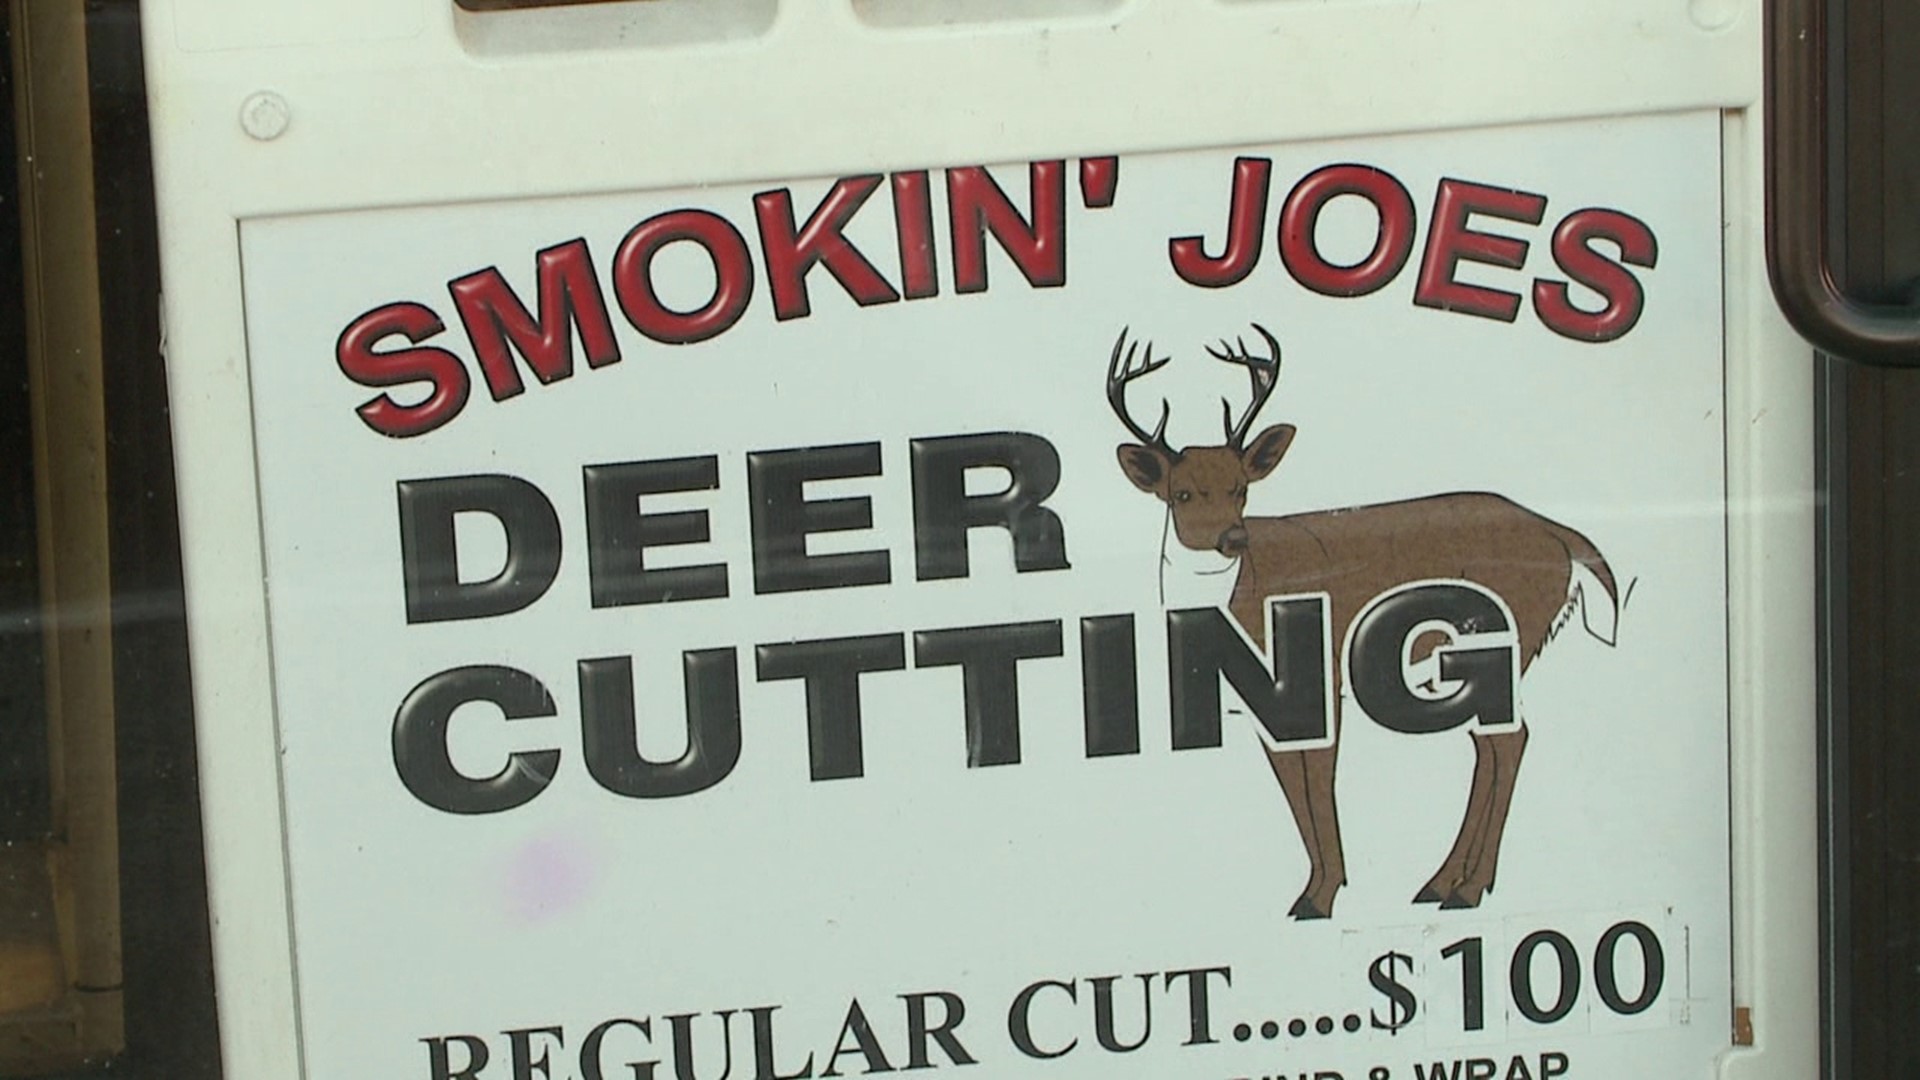 Saturday was the first day of rifle deer season in Pennsylvania and places like Smokin' Joes were bustling.